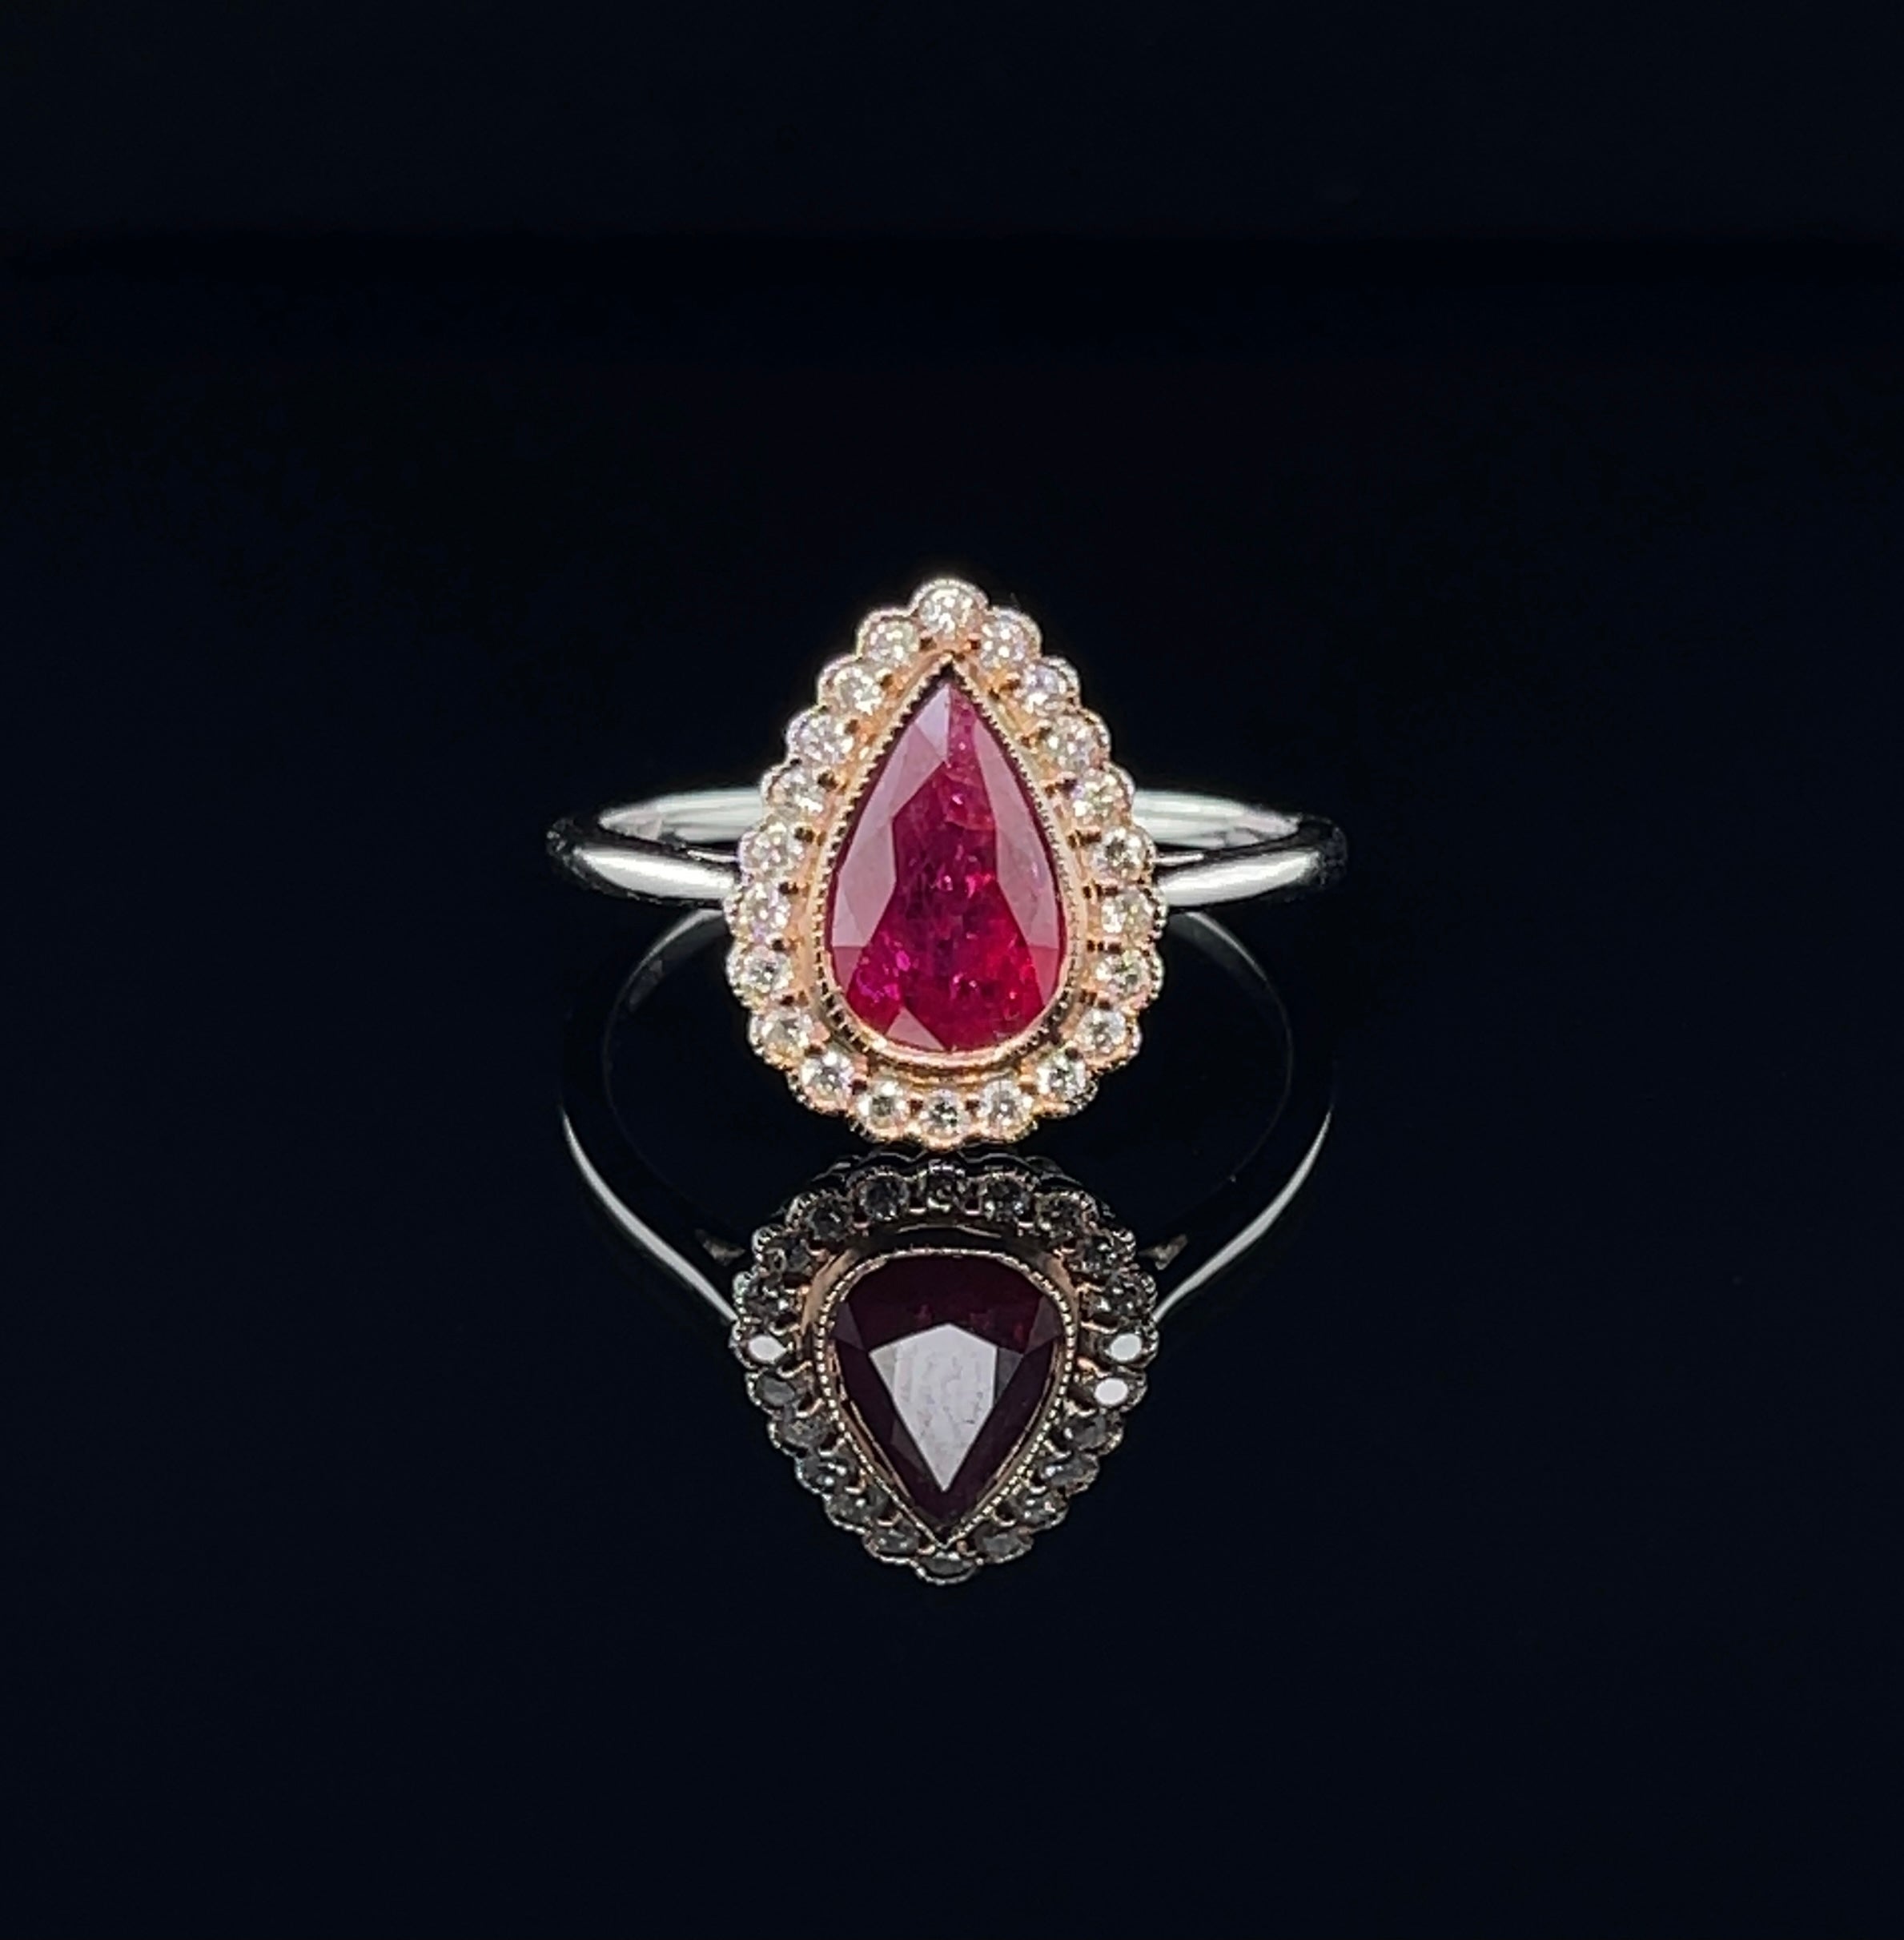 For Sale:  Imperial Jewels 18ct White and Rose Gold 'No Heat' Ruby and Diamond Ring 6